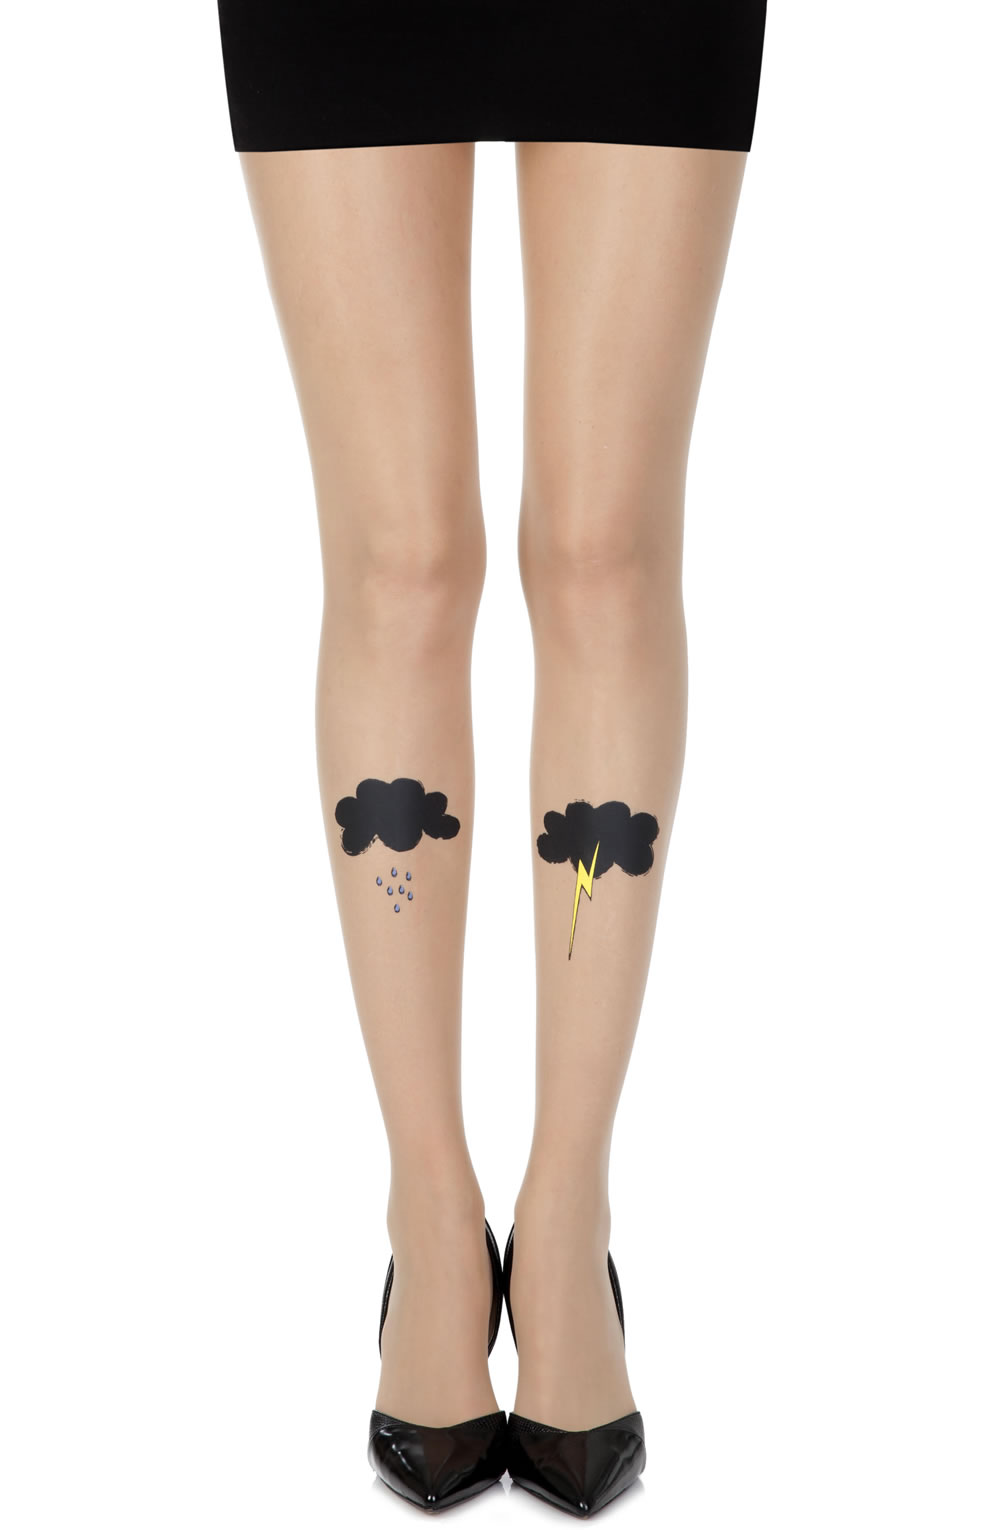 Picture of Zohara "The Perfect Storm" Skin Sheer Print Tights